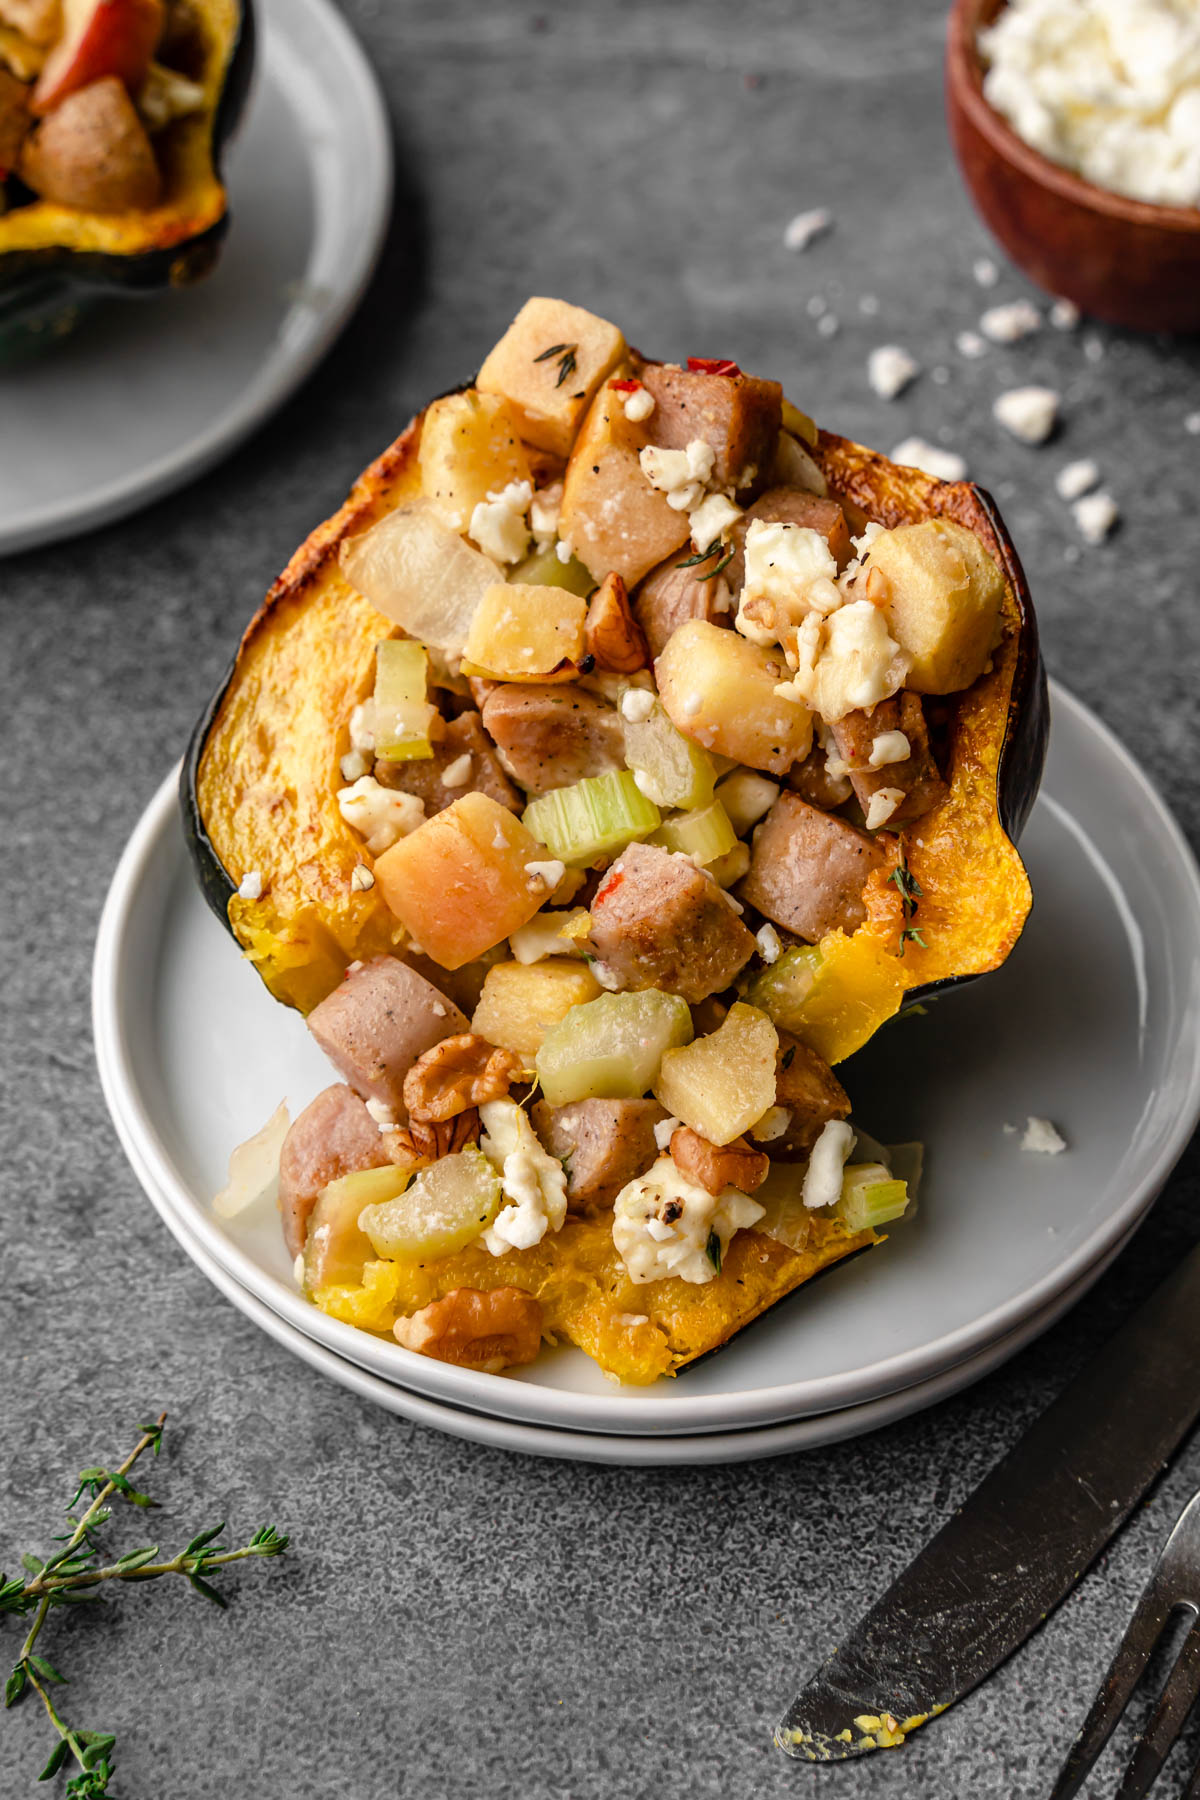 Stuffed acorn squash on a plate with a fnife, thyme, and a bowl of feta cheese beside it.